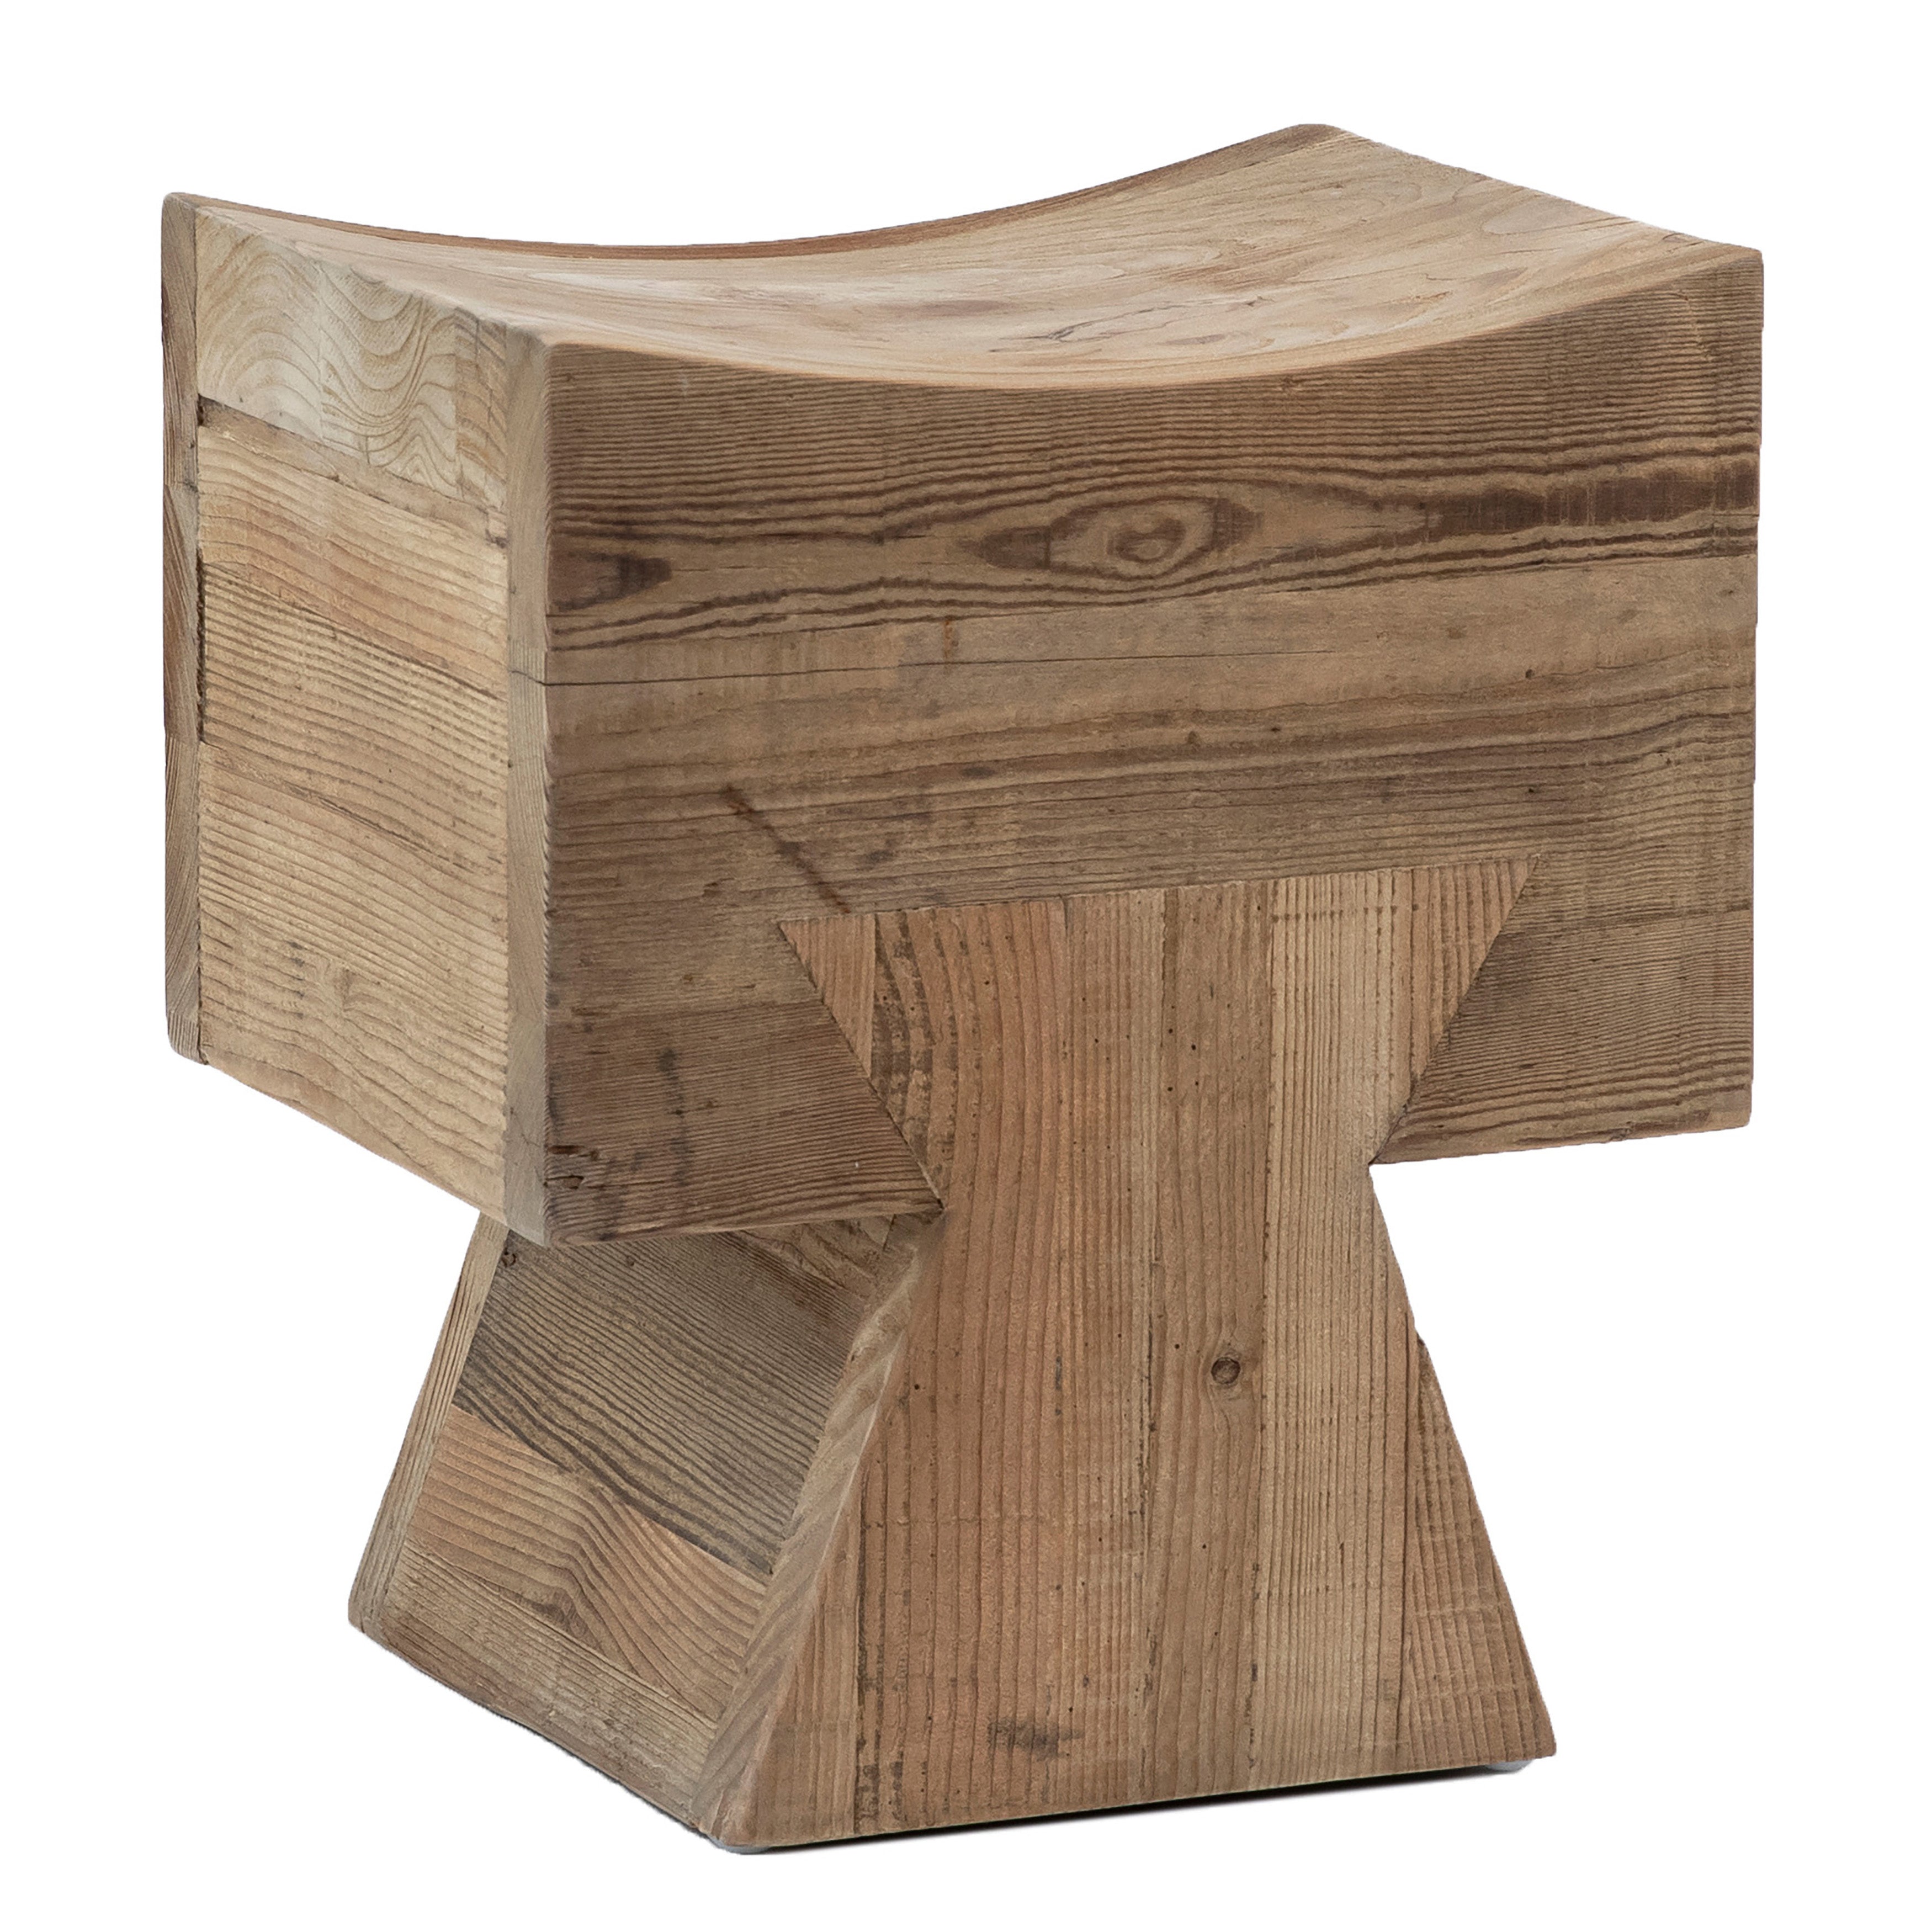 Establish a refreshing atmosphere for your interior space with his heavy carved stool. Crafted from reclaimed pine wood in a natural wood finish. The contemporary structure creates a beautiful modern look that instantly enhances your existing furniture. From your living room to your bedroom, this table blends seamlessly with any décor.Depth : 12 in Amethyst Home provides interior design, new home construction design consulting, vintage area rugs, and lighting in the Portland metro area.